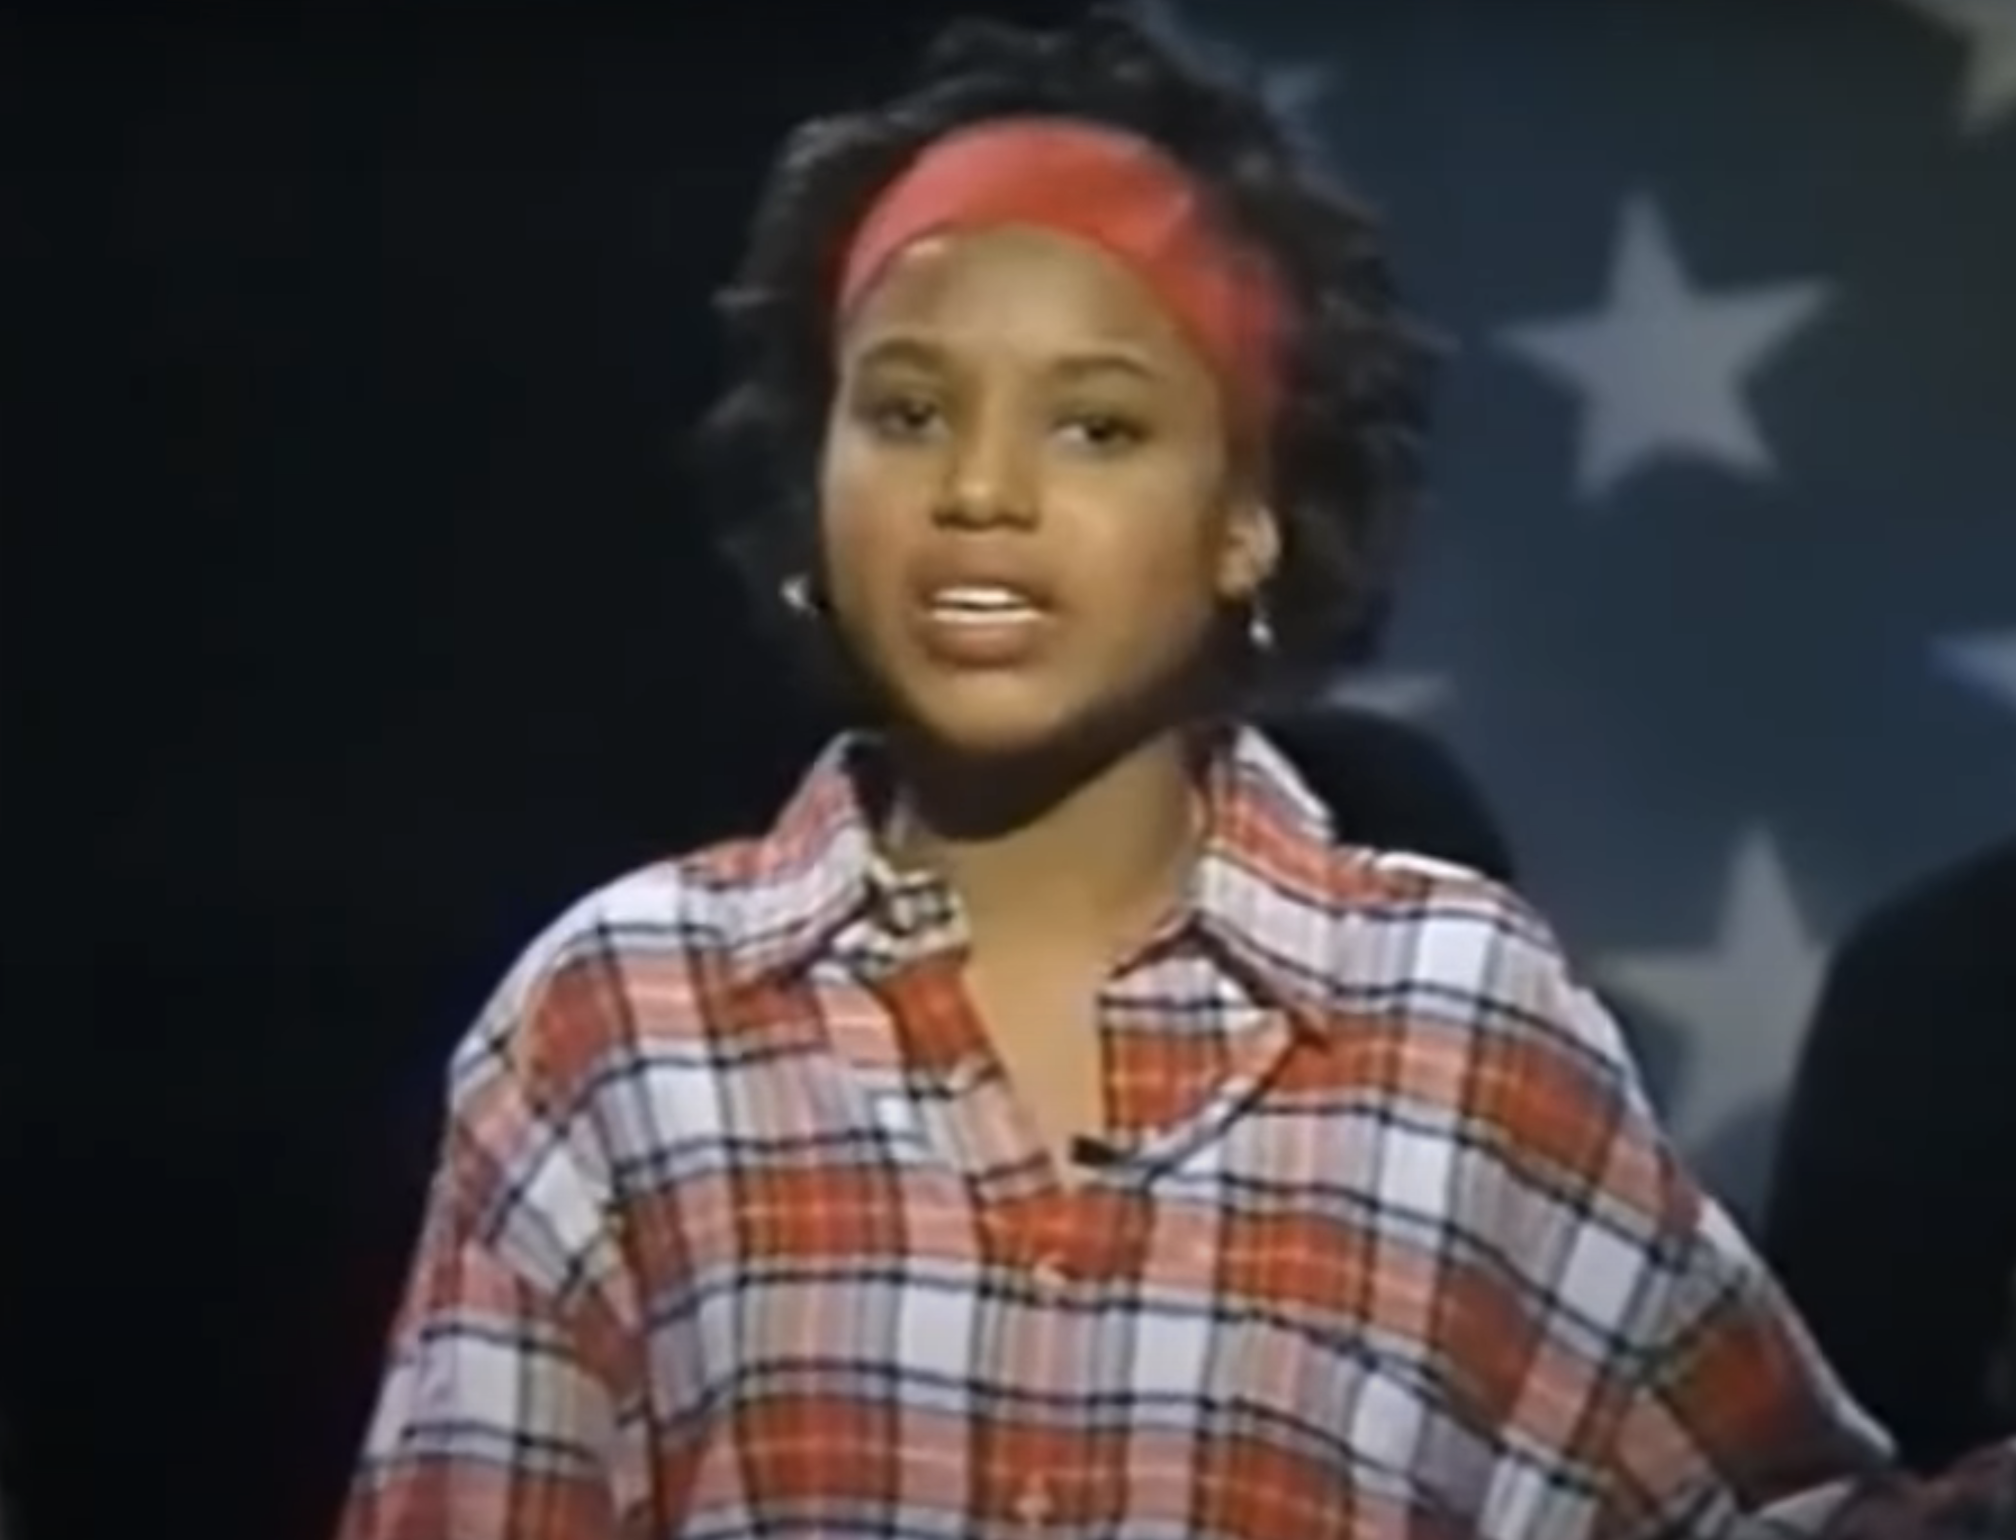 Kerry in a plaid shirt with a headband against a starry backdrop